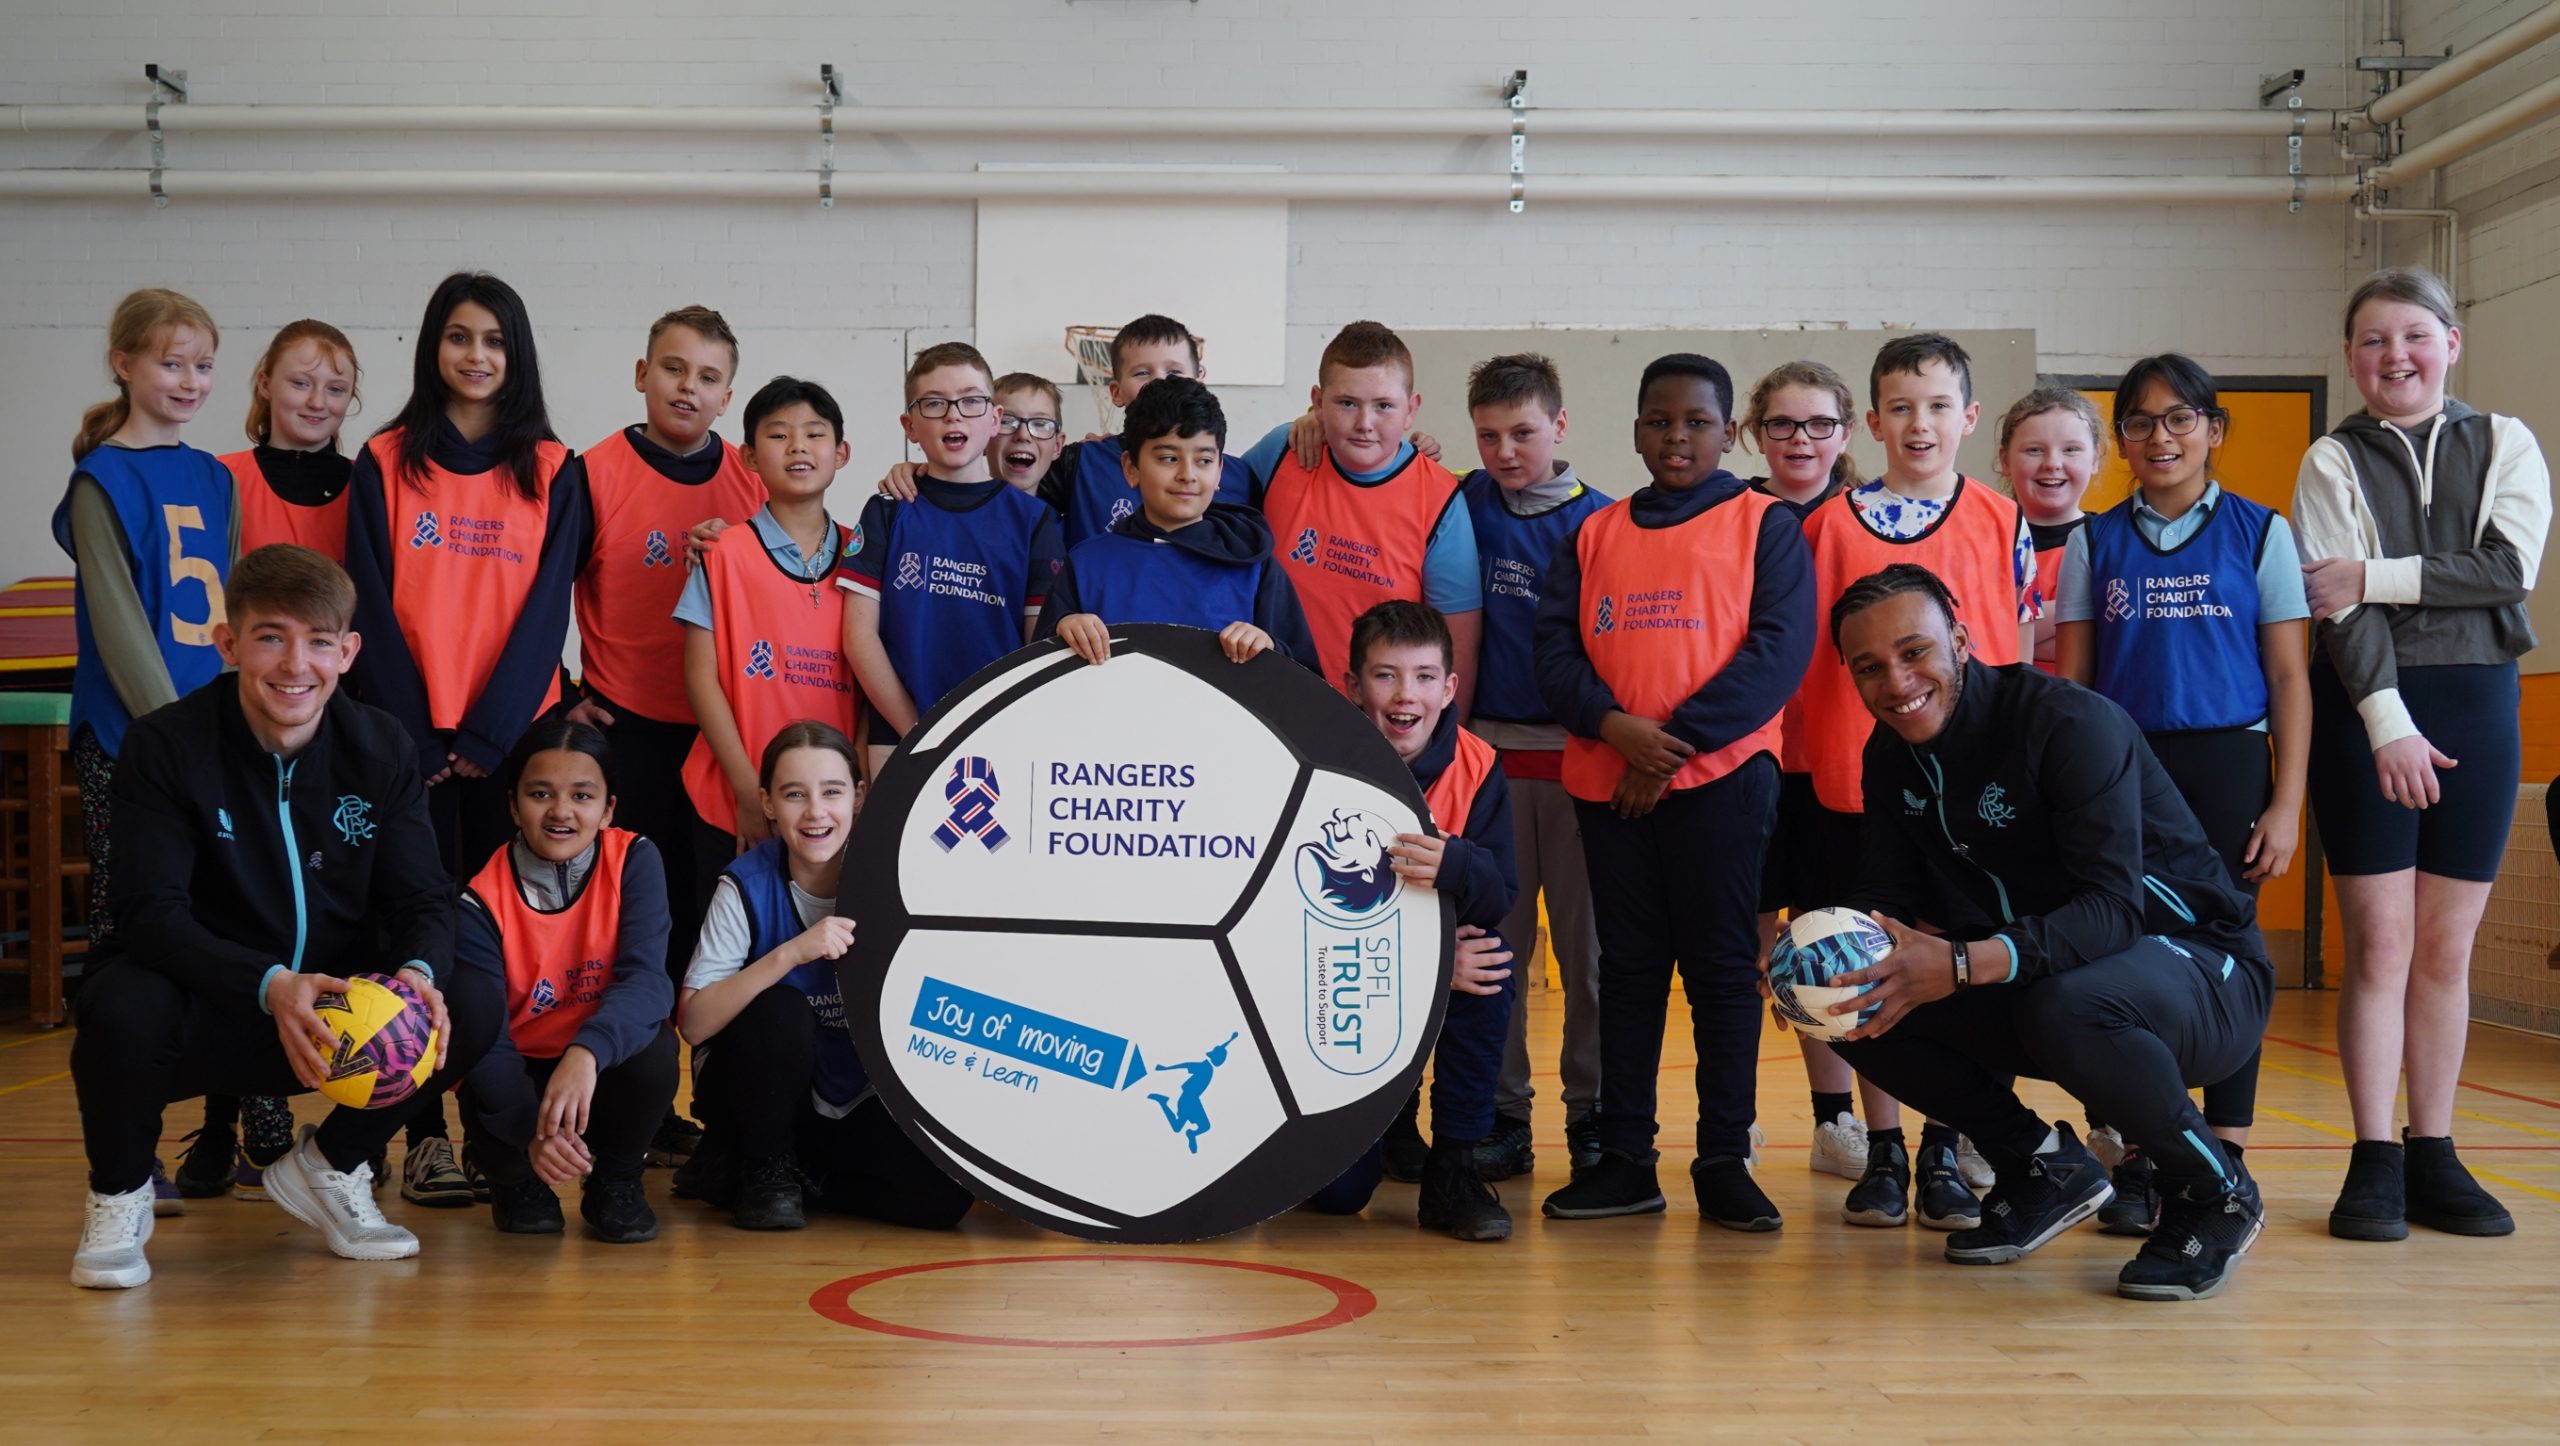 Rangers players Zak Lovelace and Robbie Fraser in a group photo with school pupils.